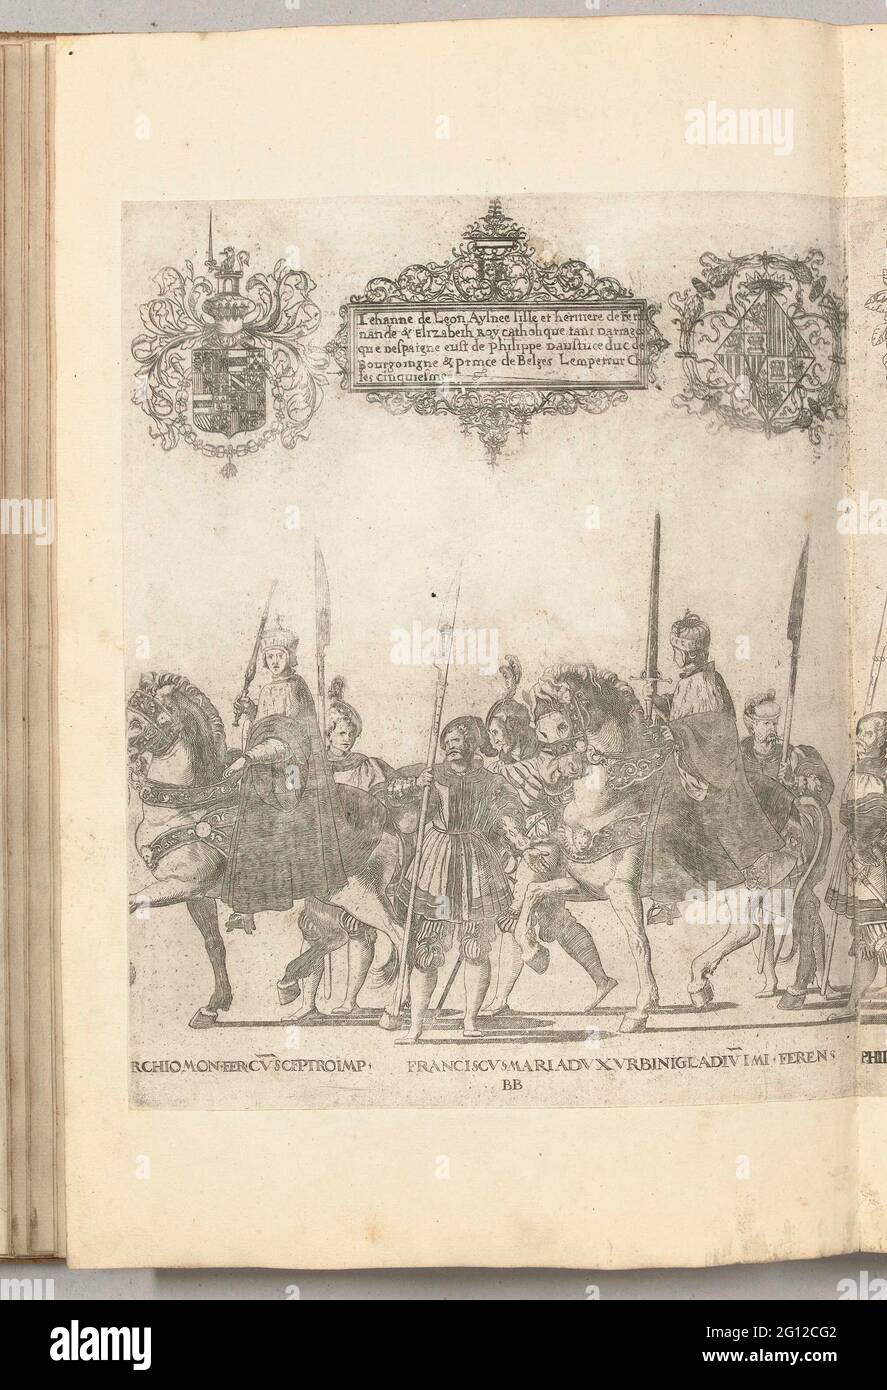 Bonifatius IV Paleologo, Markgraaf of Monferrato, with the imperial scepter and Francesco Maria della Rovere, Duke of Urbino, with the imperial sword, plate BB; Procession of Karel V with the Pope in Bologna after his coronation to Emperor, 1530. Boniface IV Paleologo, Markgraaf of Monferrato, with the imperial scepter and Francesco Maria della Rovere, Duke of Urbino, with the Imperial Sword, Plate BB. Procession of Charles V with the Pope Clemens VII in Bologna after his coronation to Emperor, February 24, 1530. Stock Photo